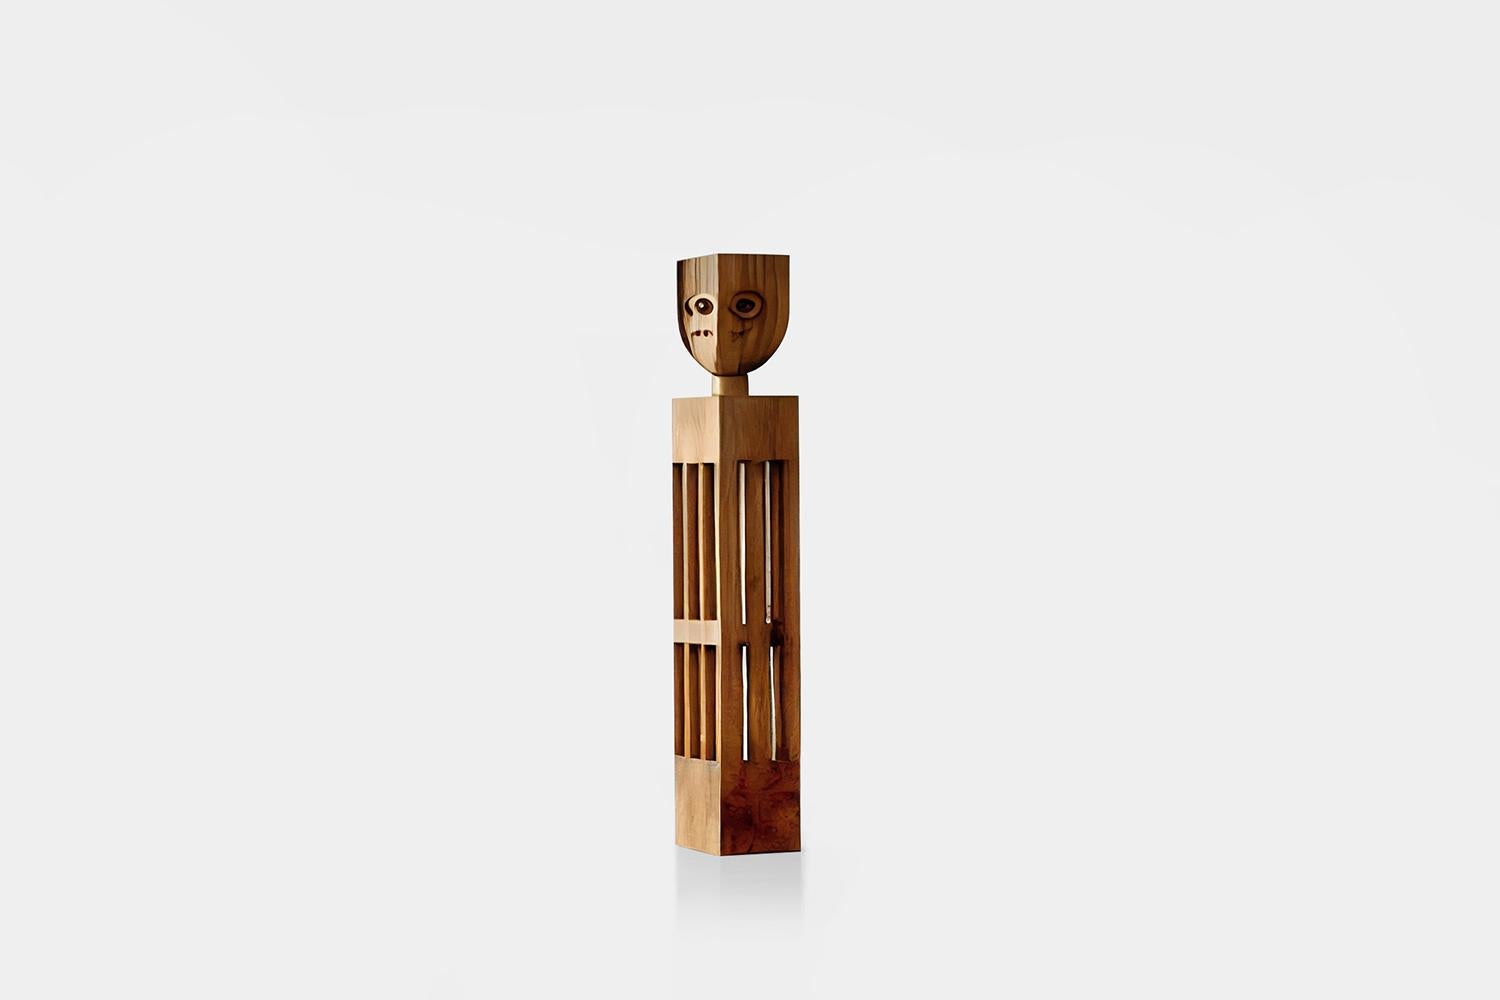 American Craftsman Figurative Wood Sculpture Inspired in Constantin Brancusi art, 3 Kings by NONO A For Sale